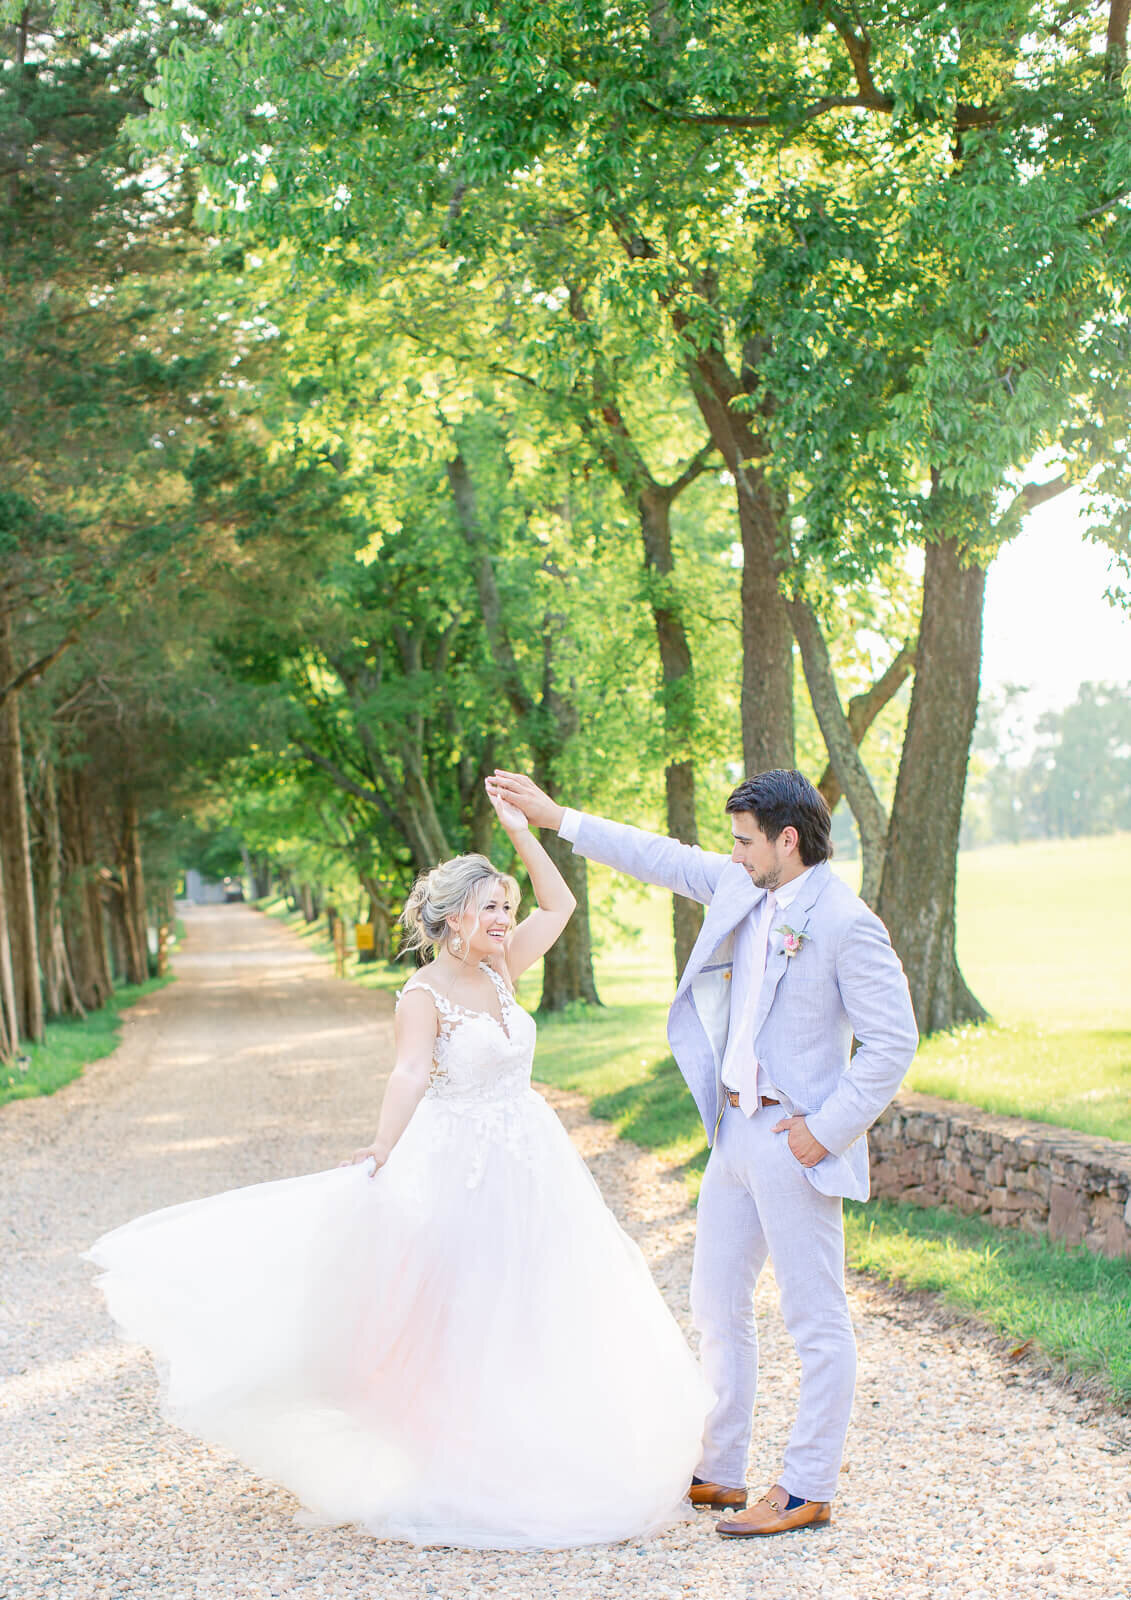 Groom twirling bride at golden hour at Great Marsh Estate. Captured by Bethany Aubre Photography.